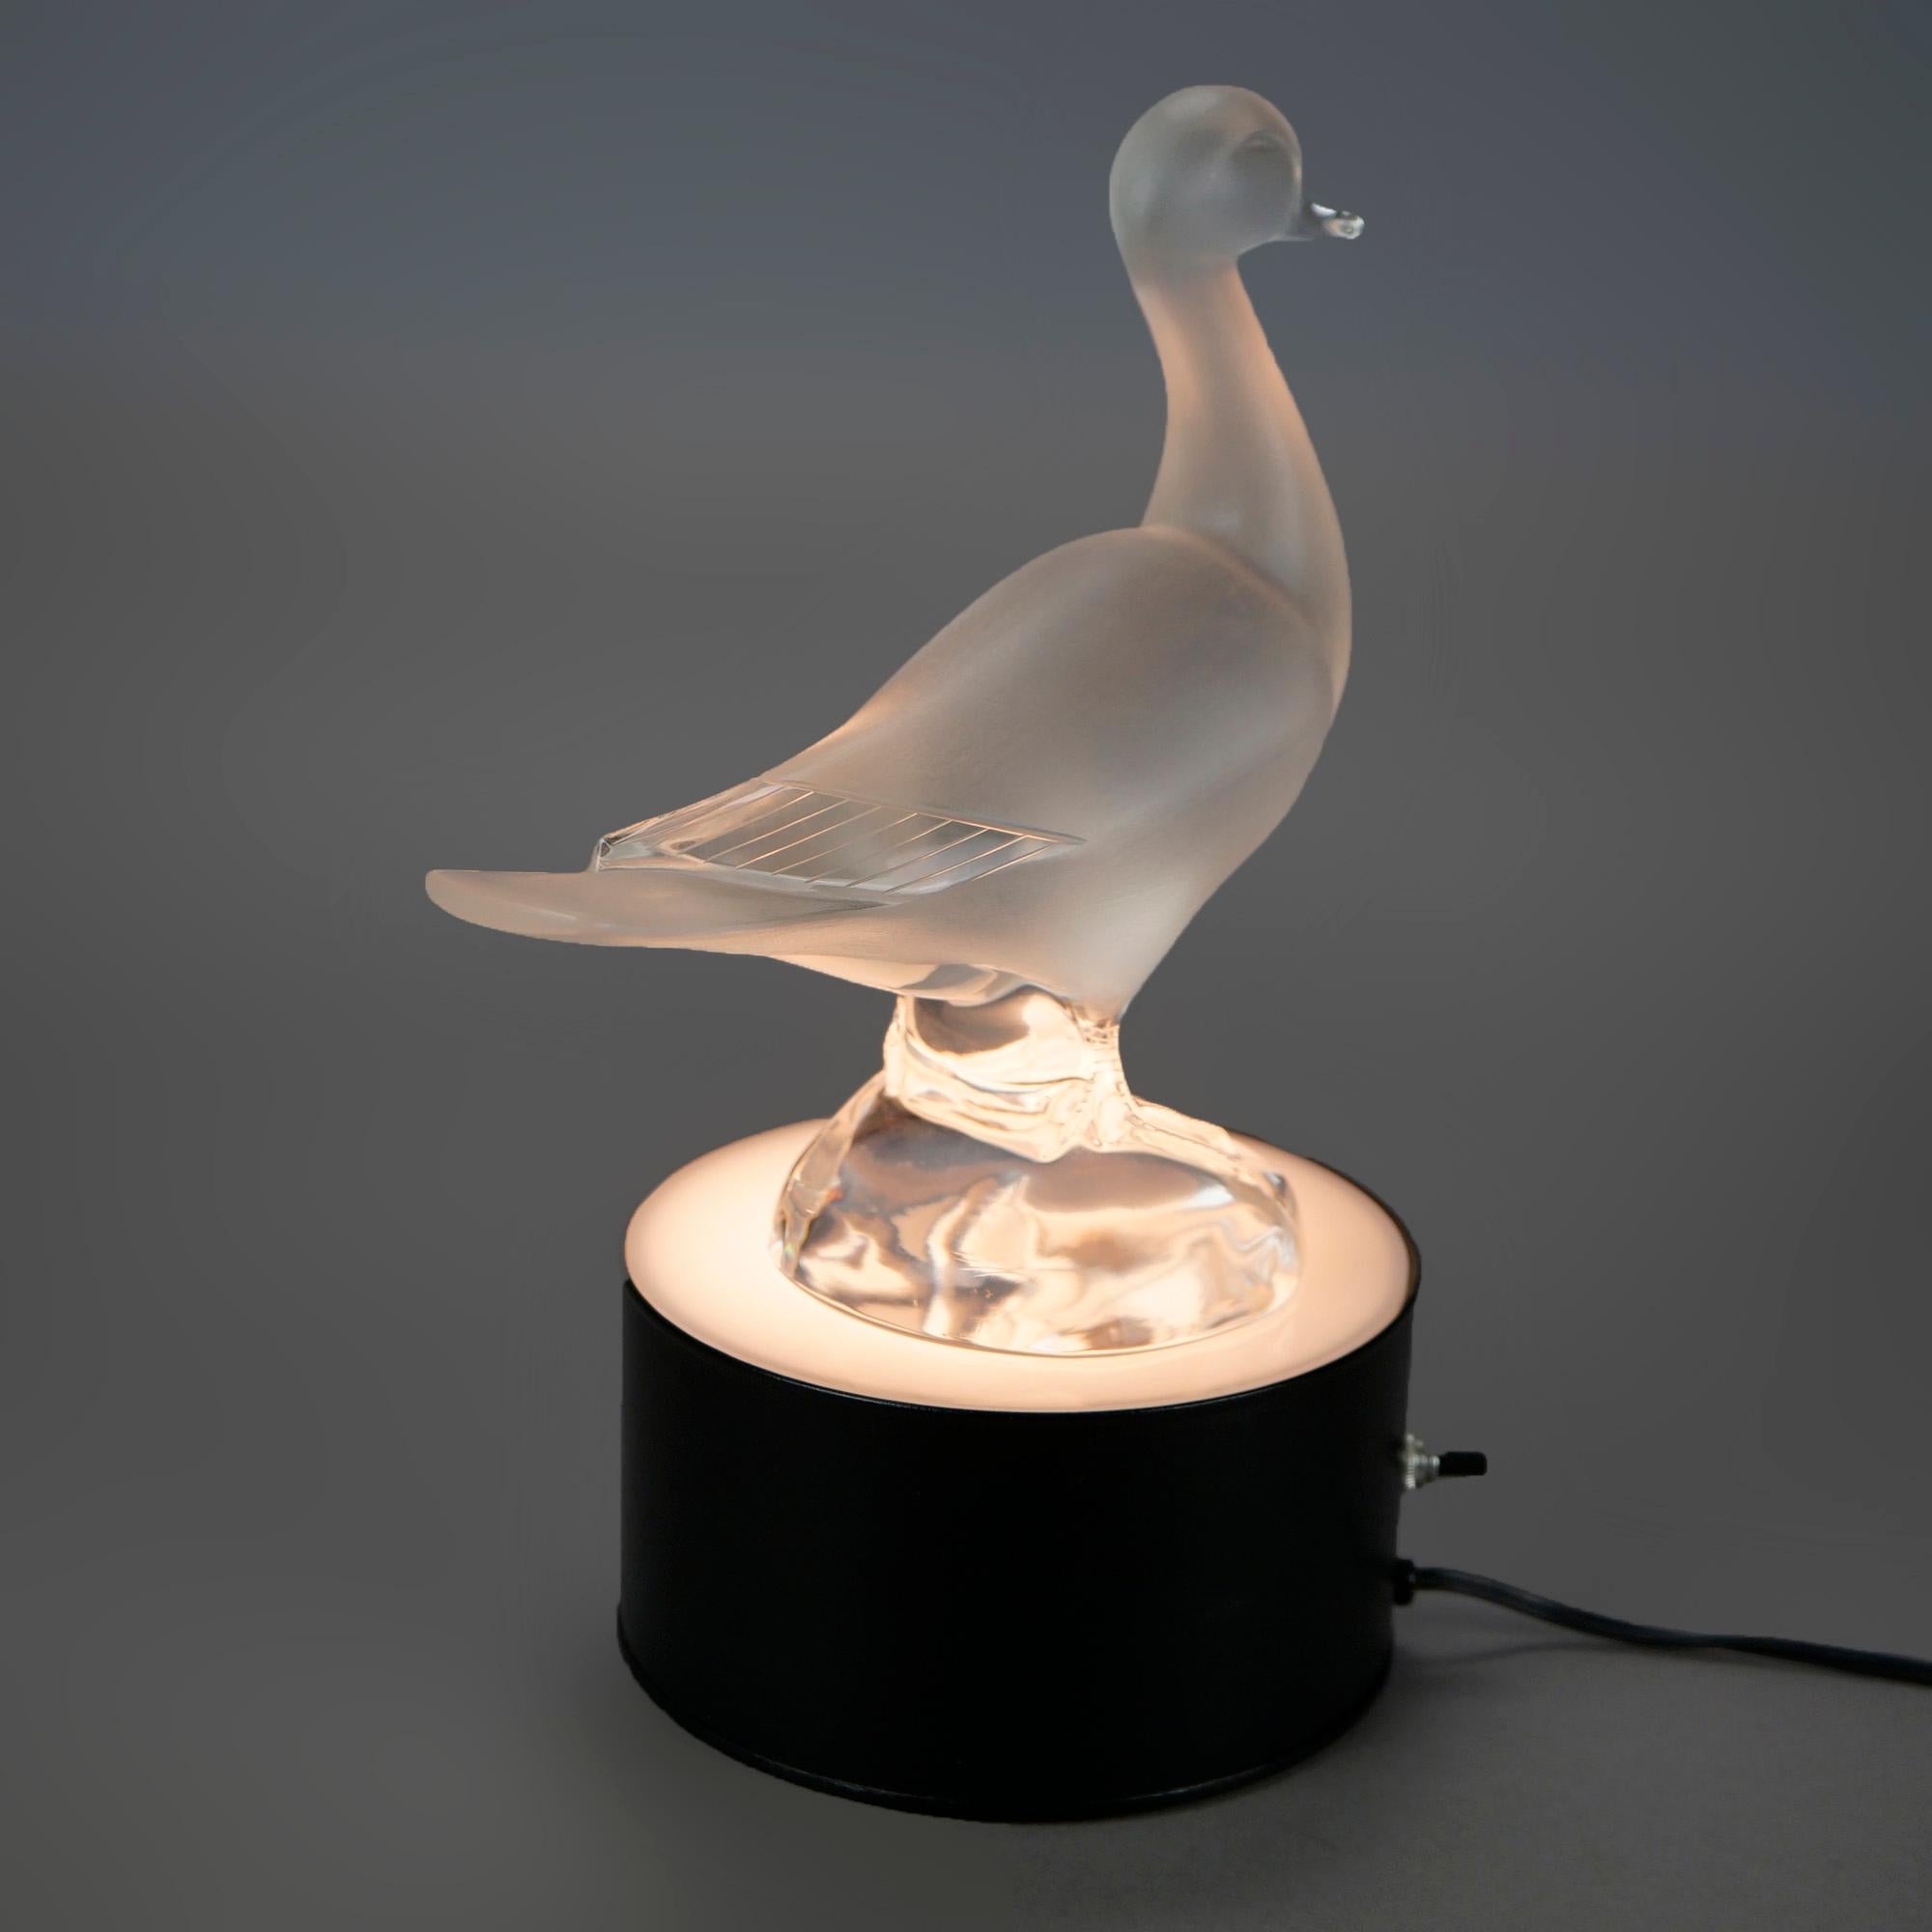 French Lalique Art Glass Duck Sculpture on Lighted Display, Signed, 20th C 1